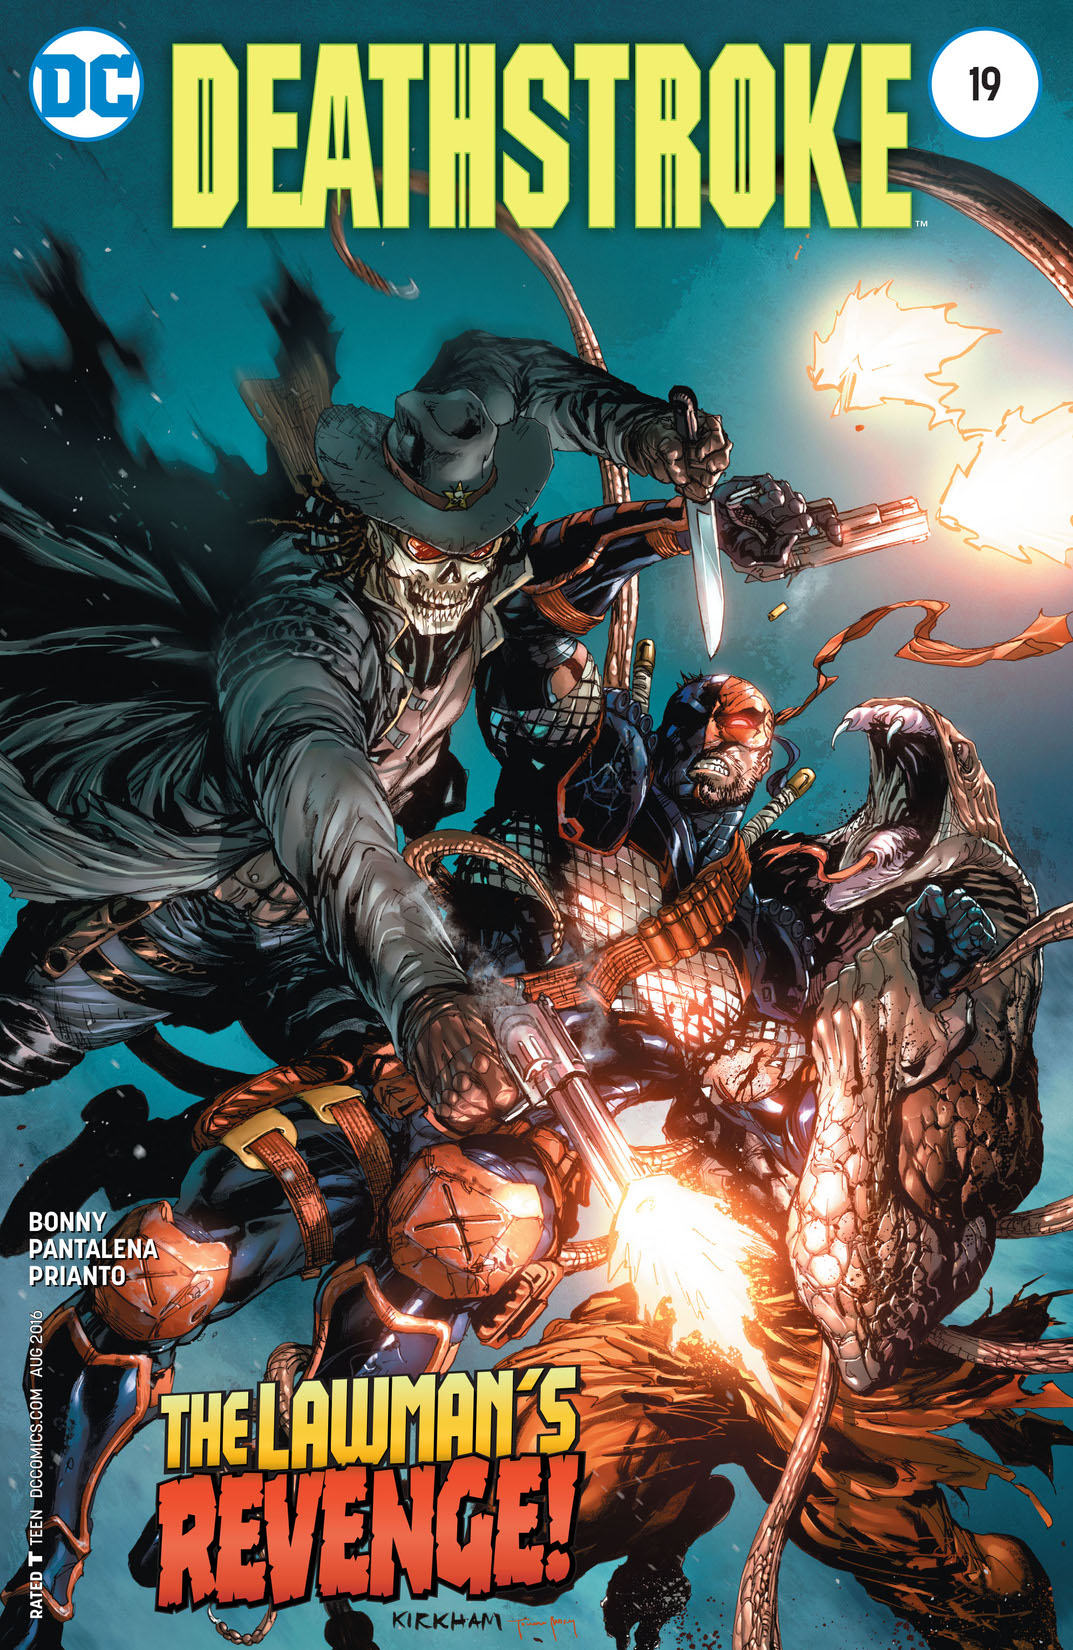 Deathstroke (2014-) #19 preview images